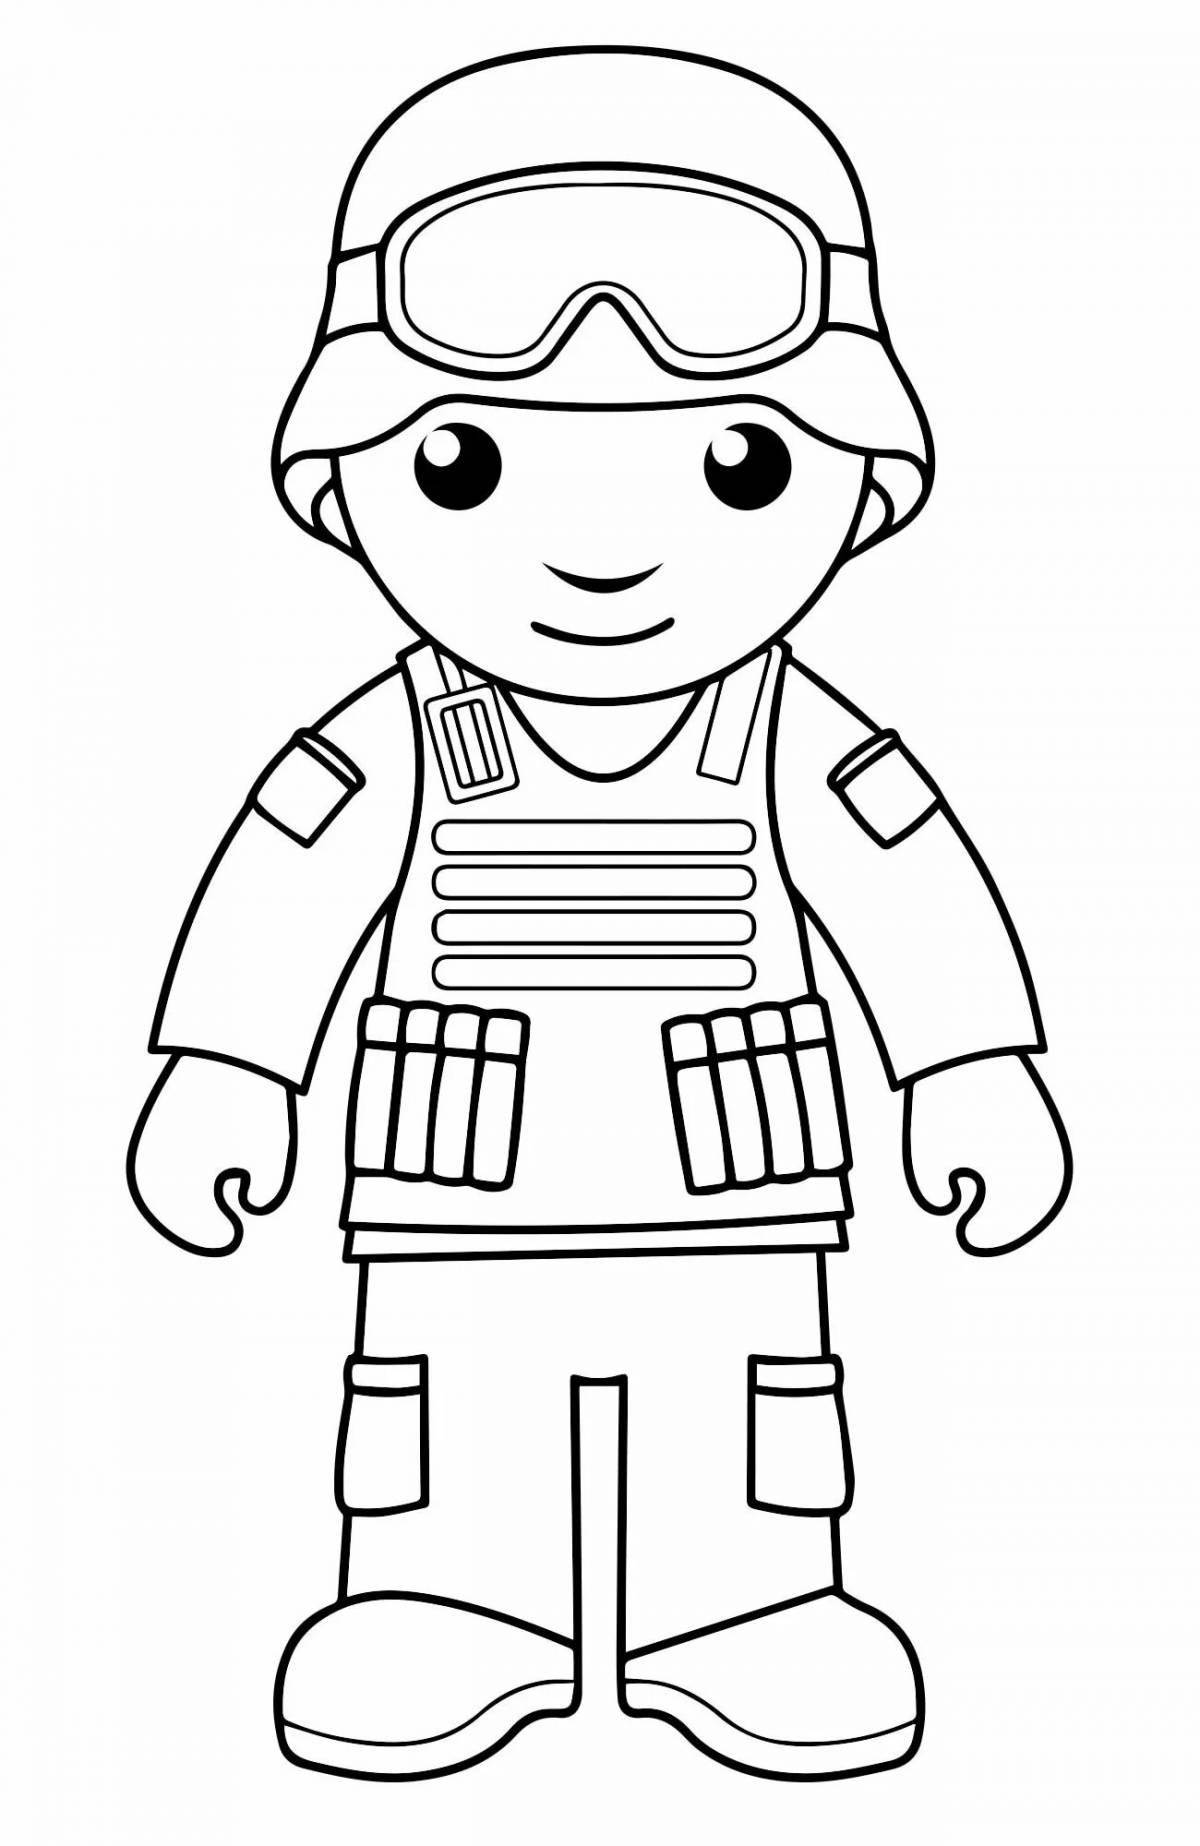 Intriguing army coloring book for kids